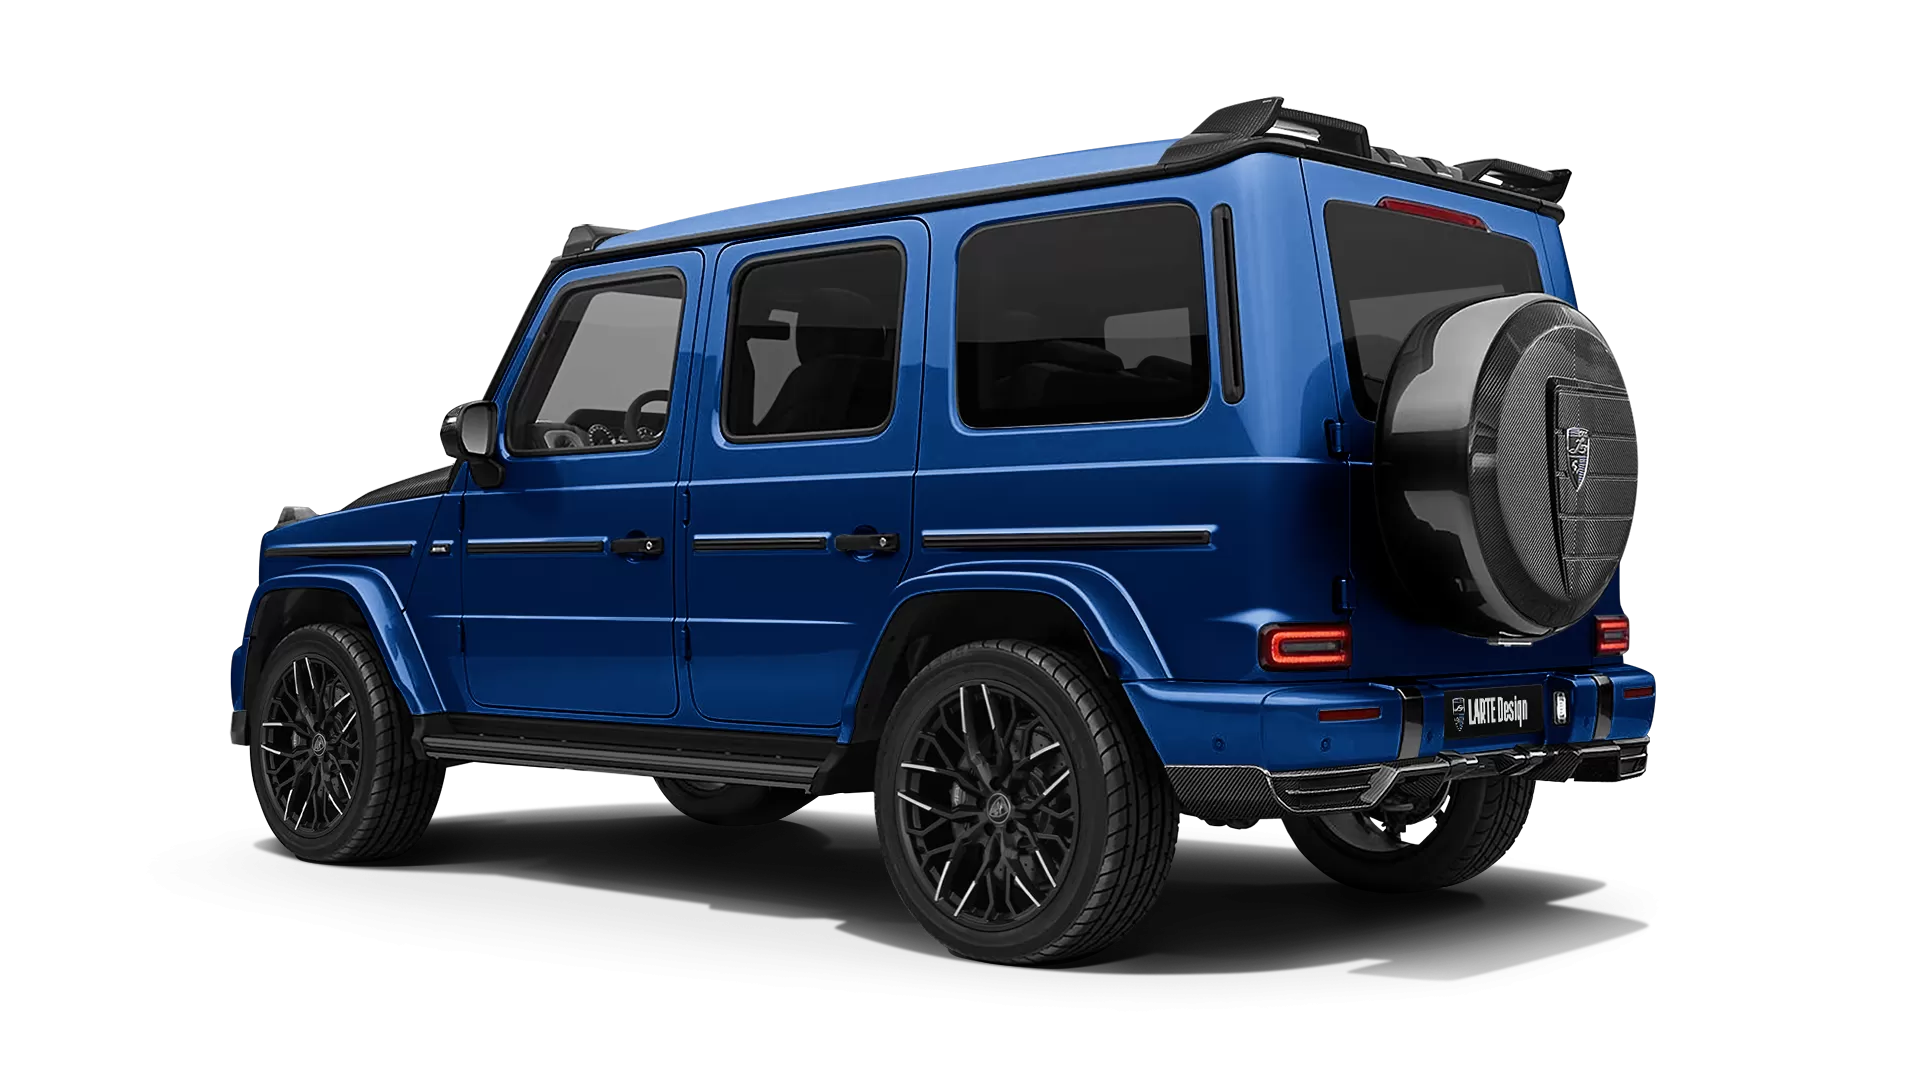 Mercedes G class W463 with carbon body kit: back view shown in Brilliant Blue